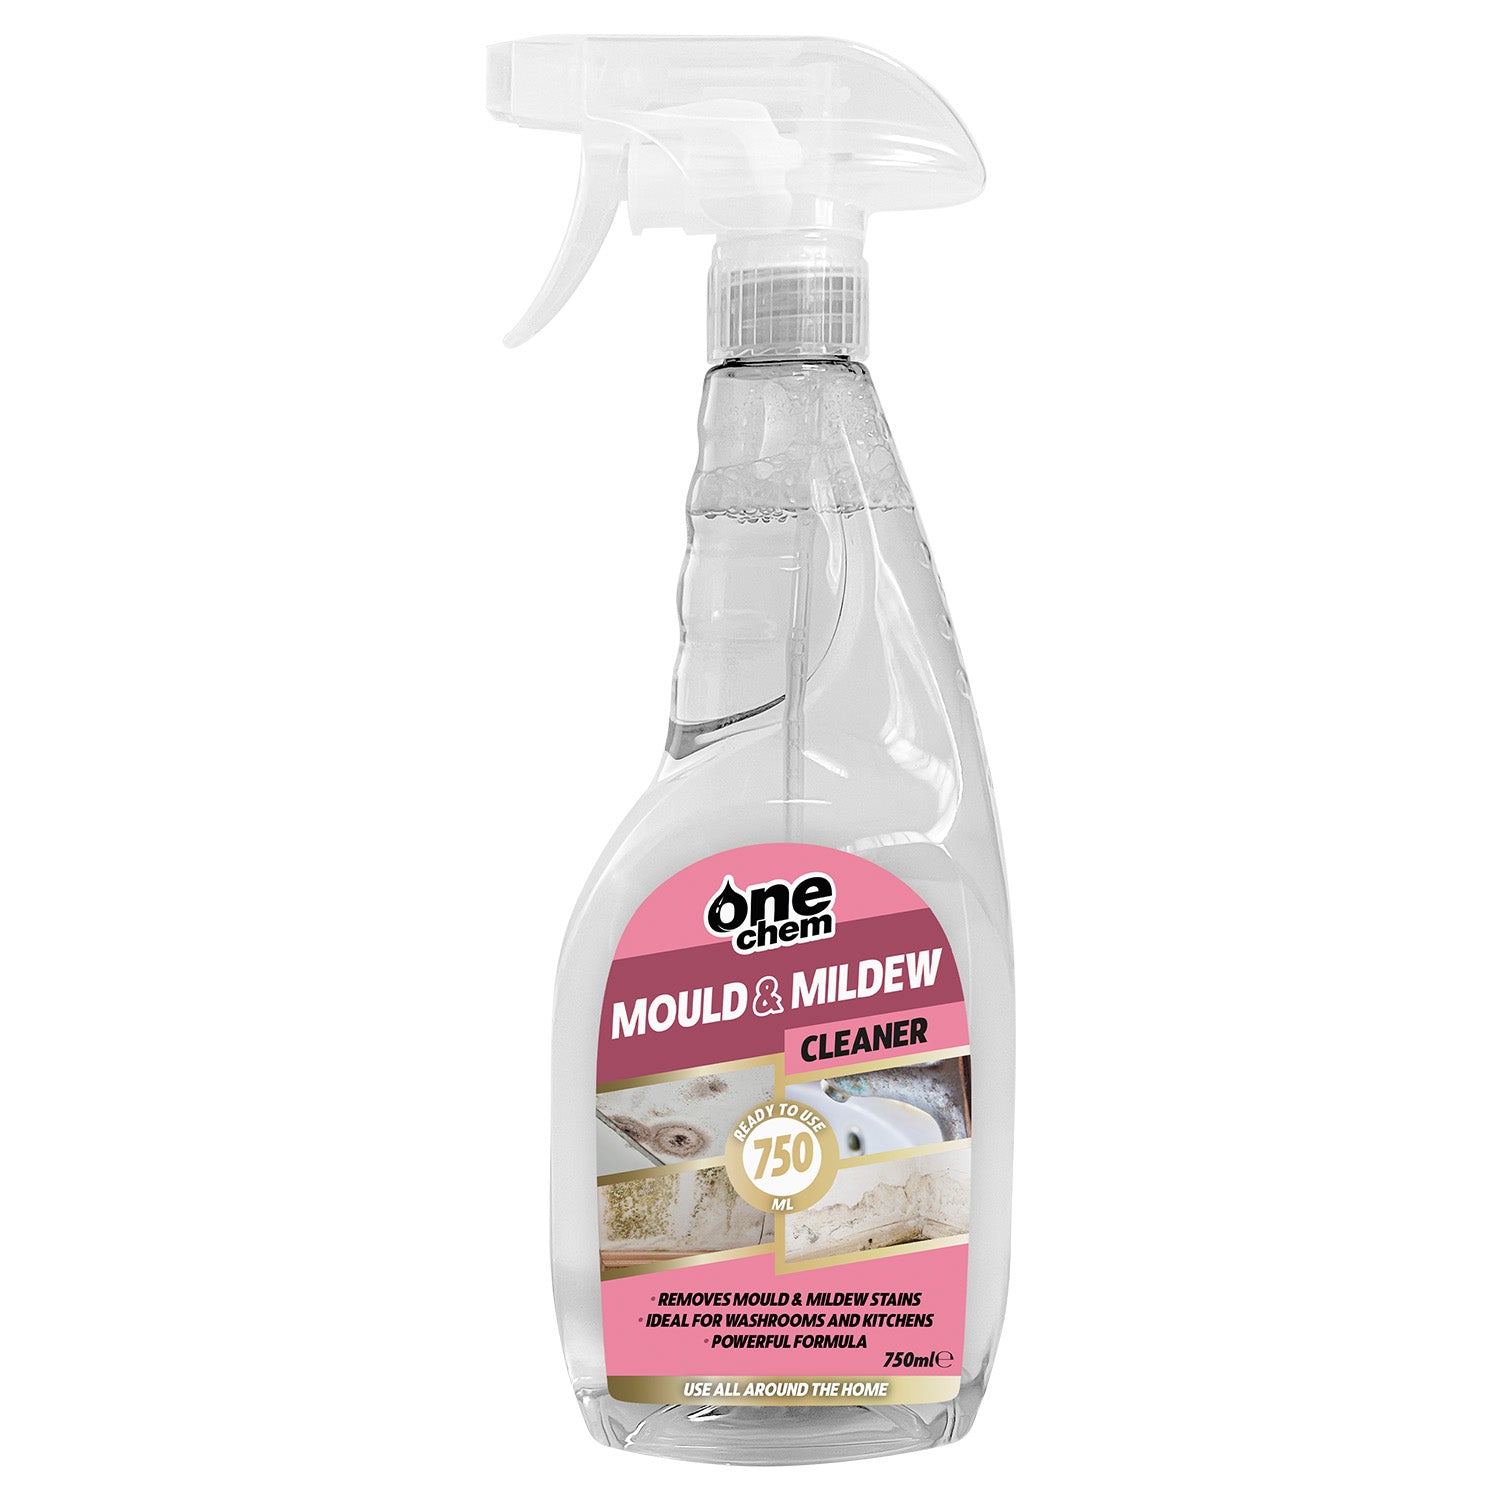 One Chem - Mould and Mildew Cleaner 750 ml